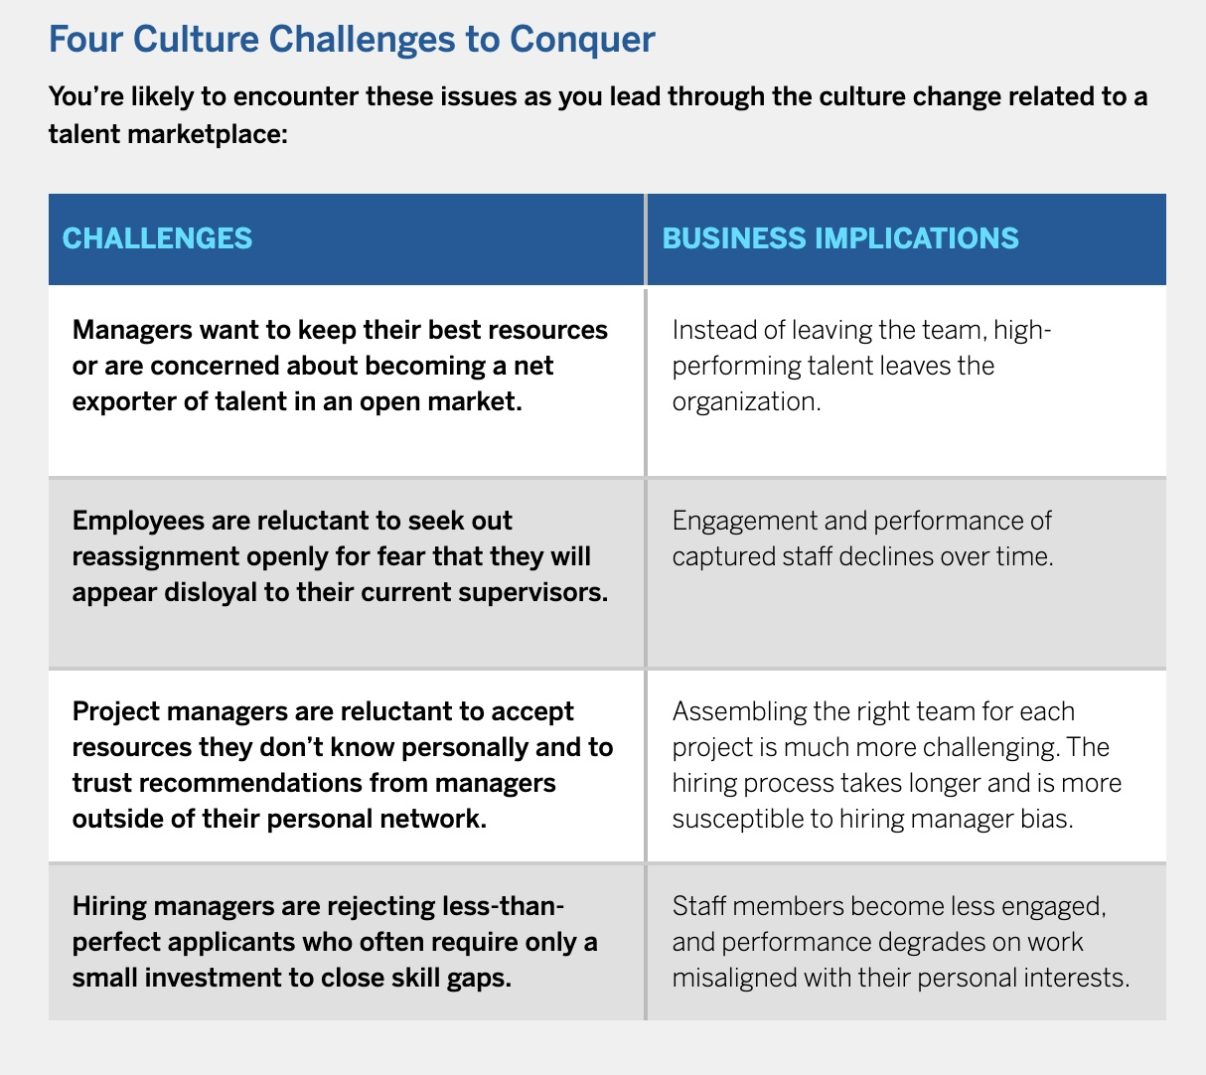 Four Culture Challenges to Conquer